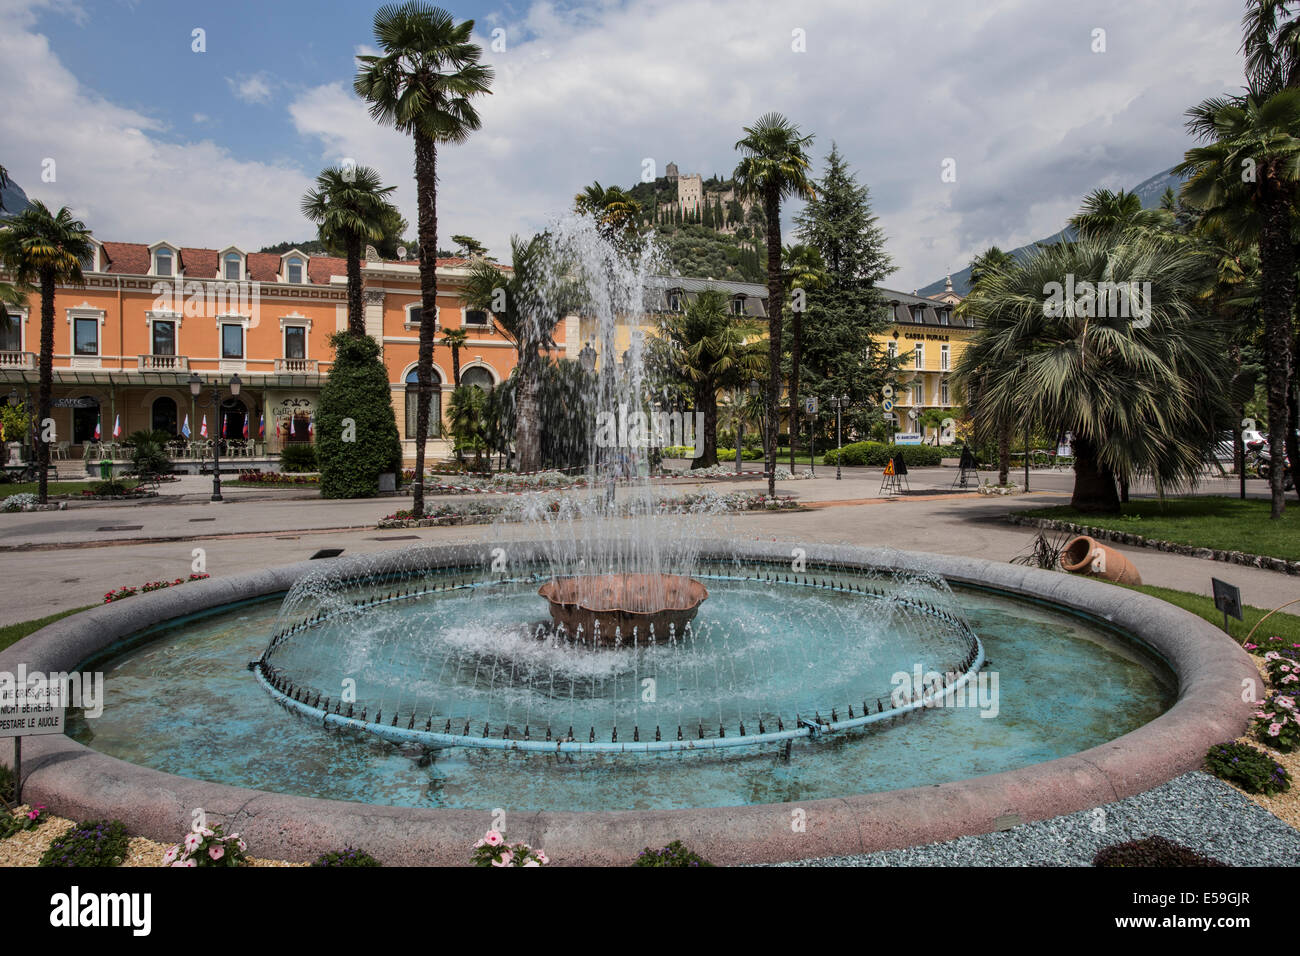 Fountain in the village of Arco, Italy Stock Photo